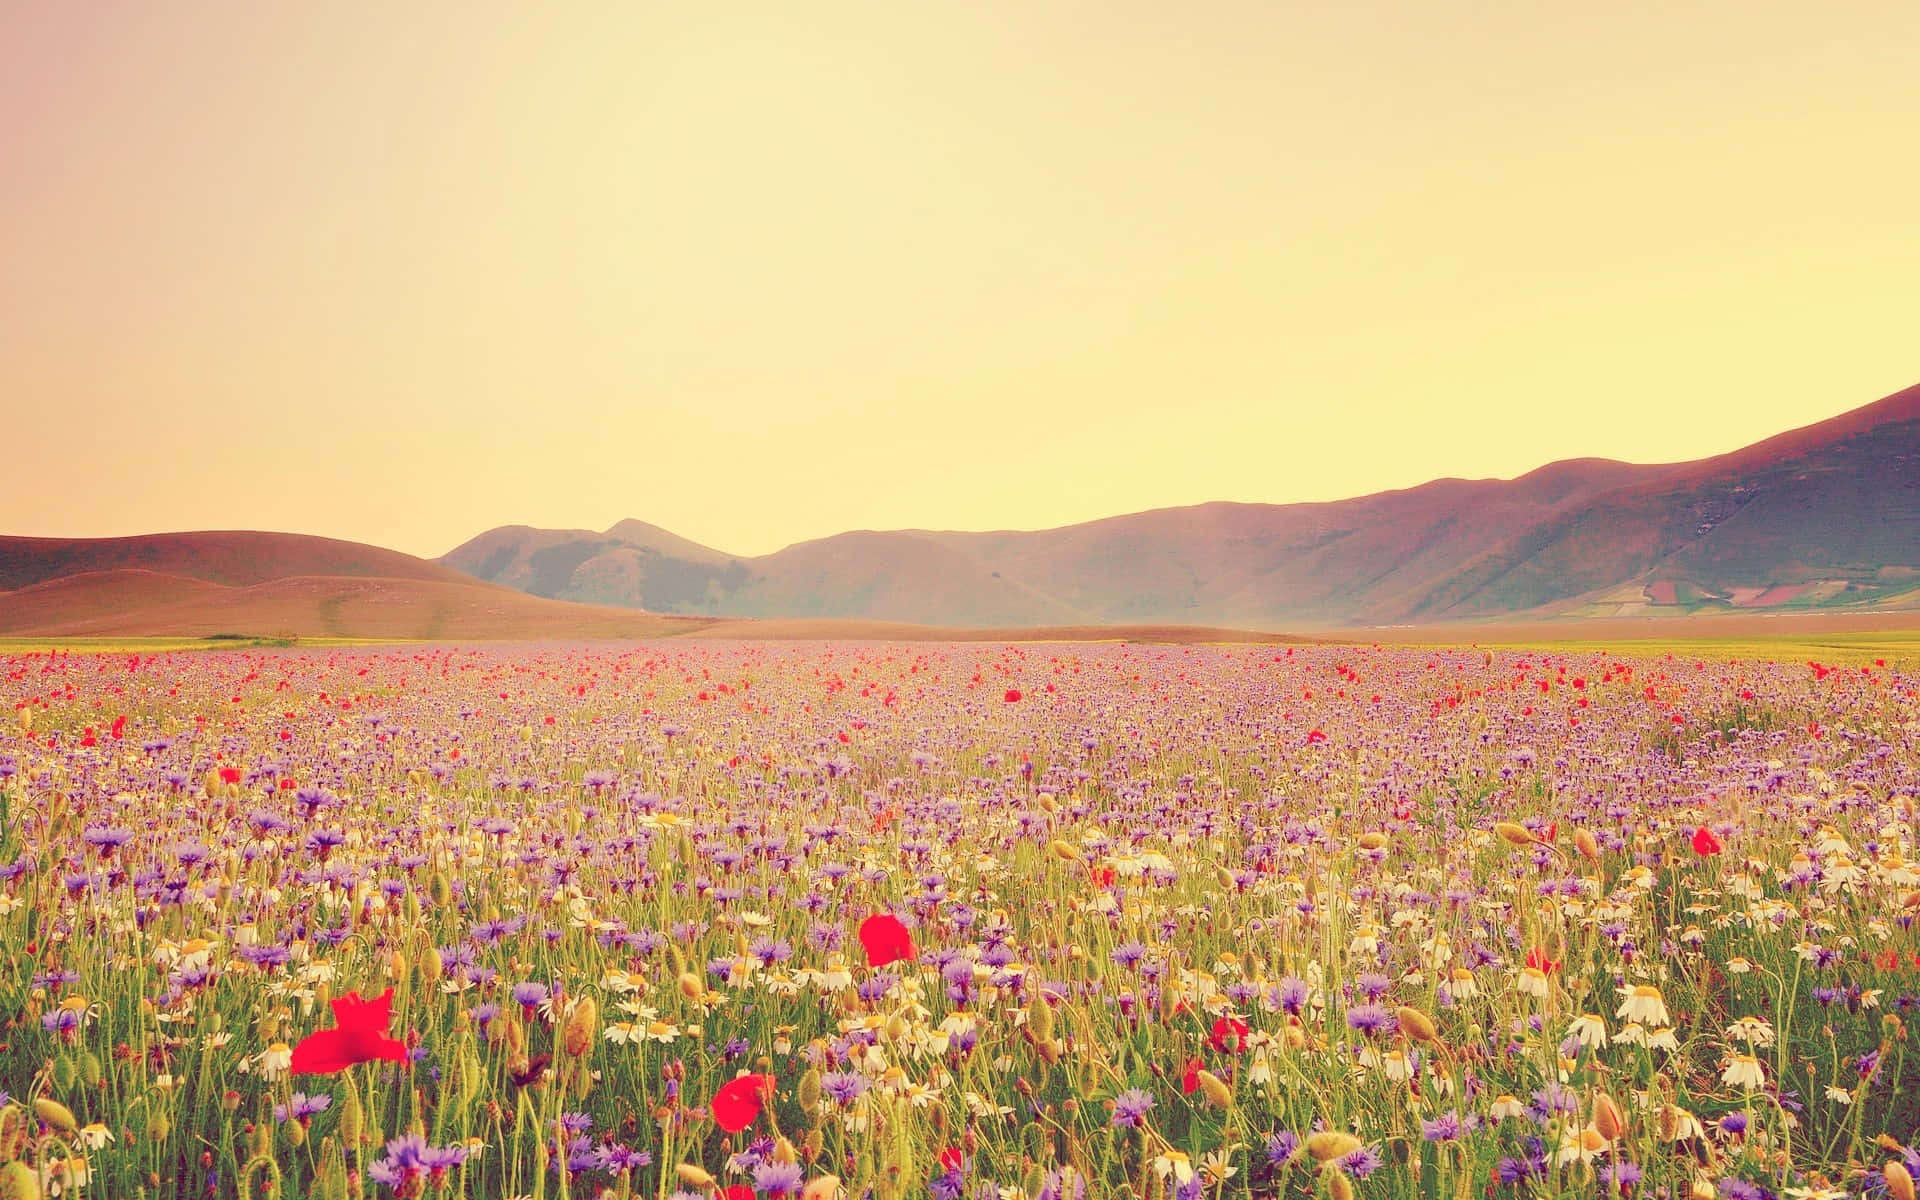 Colorful Wildflowers in a Field of Green